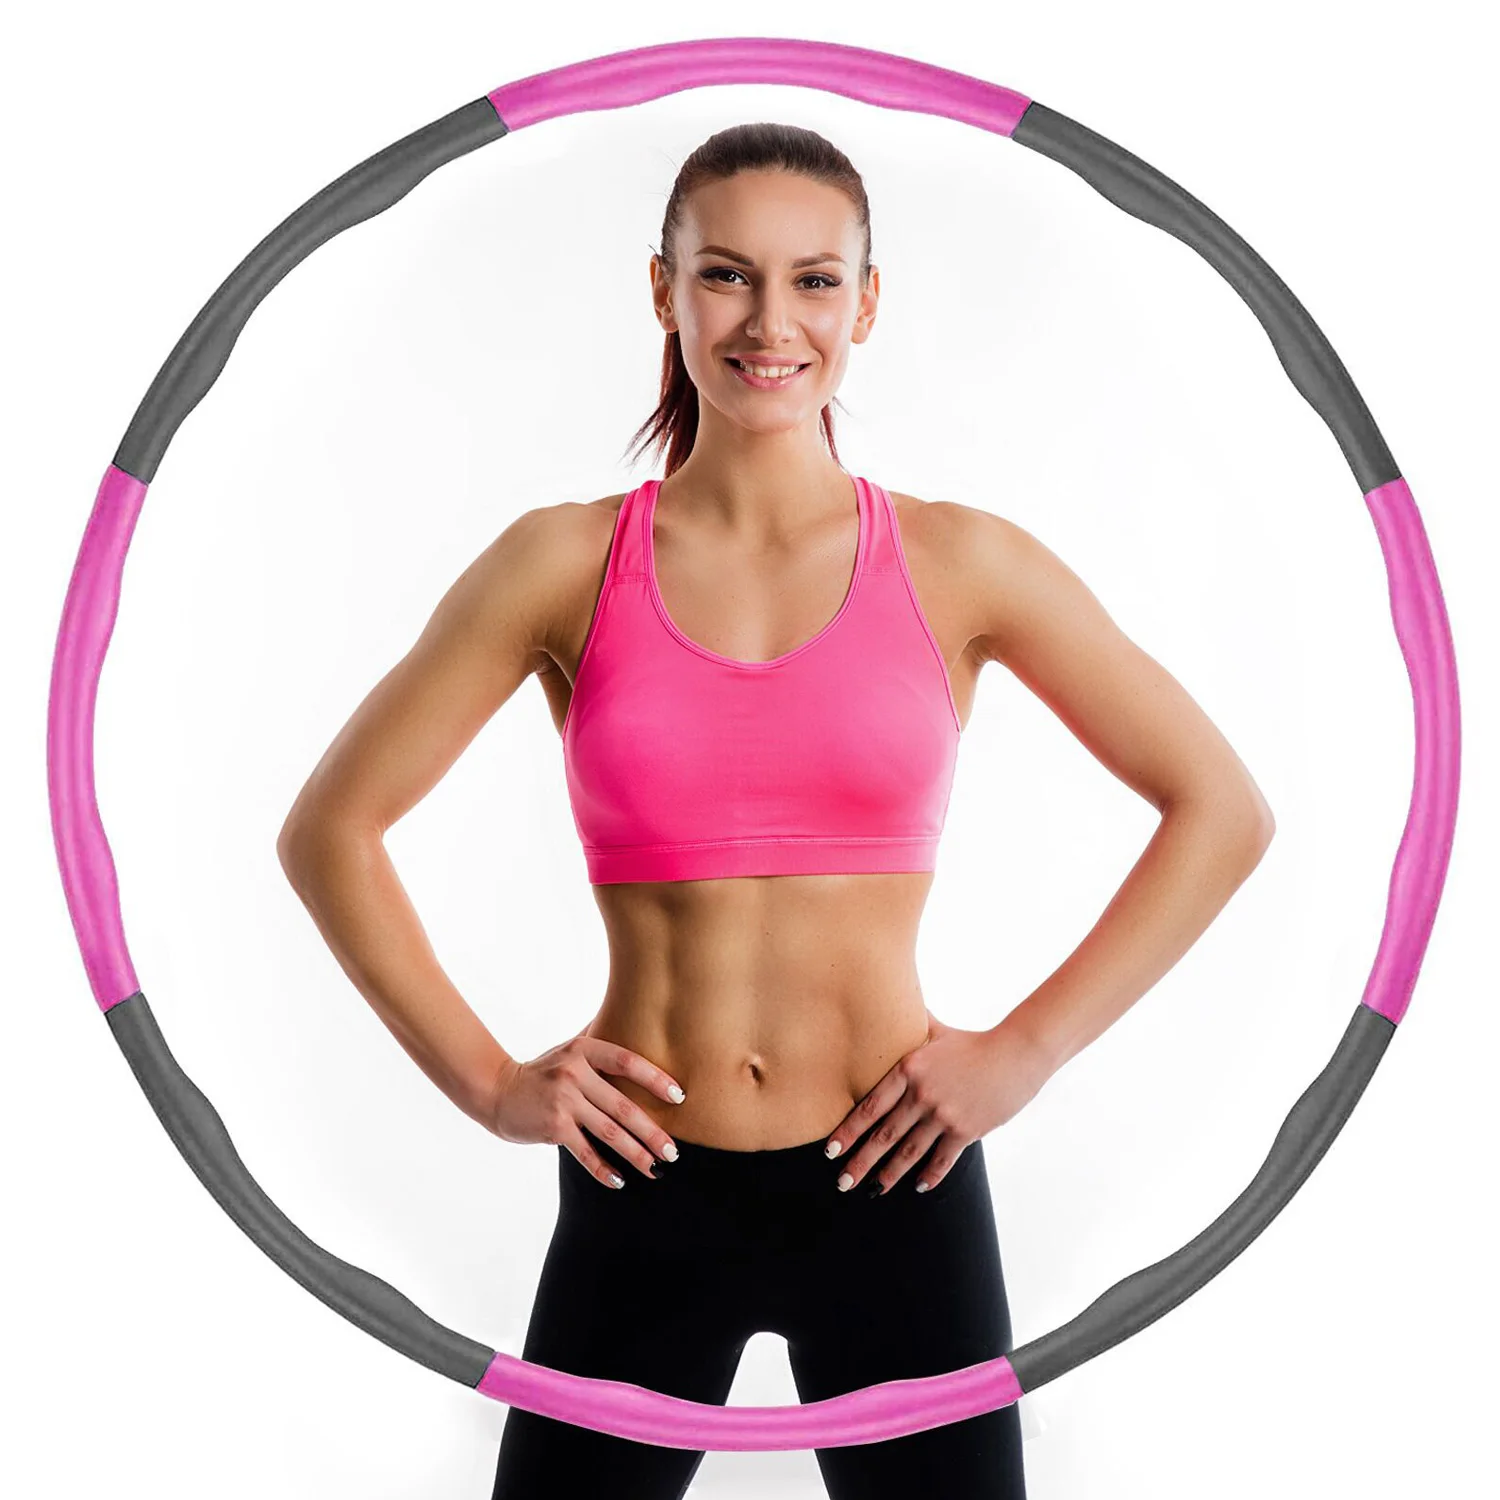 

Best Selling ho la hoop Weighted Adult Fitness High Quality Fitness Workout For Home 8 Sections Smart Exercise Ring, Pink